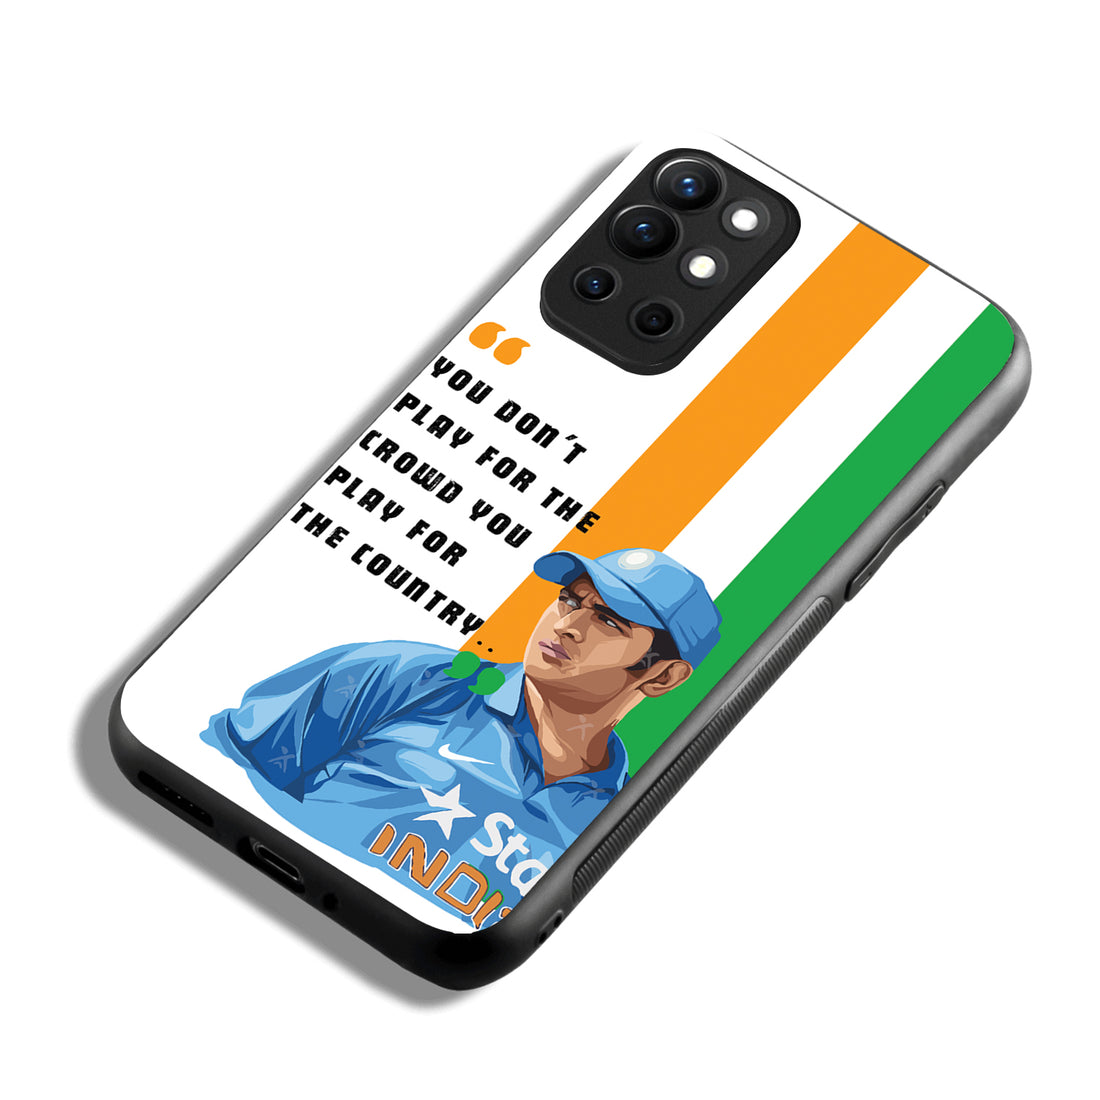 Dhoni Sports Oneplus 9 R Back Case